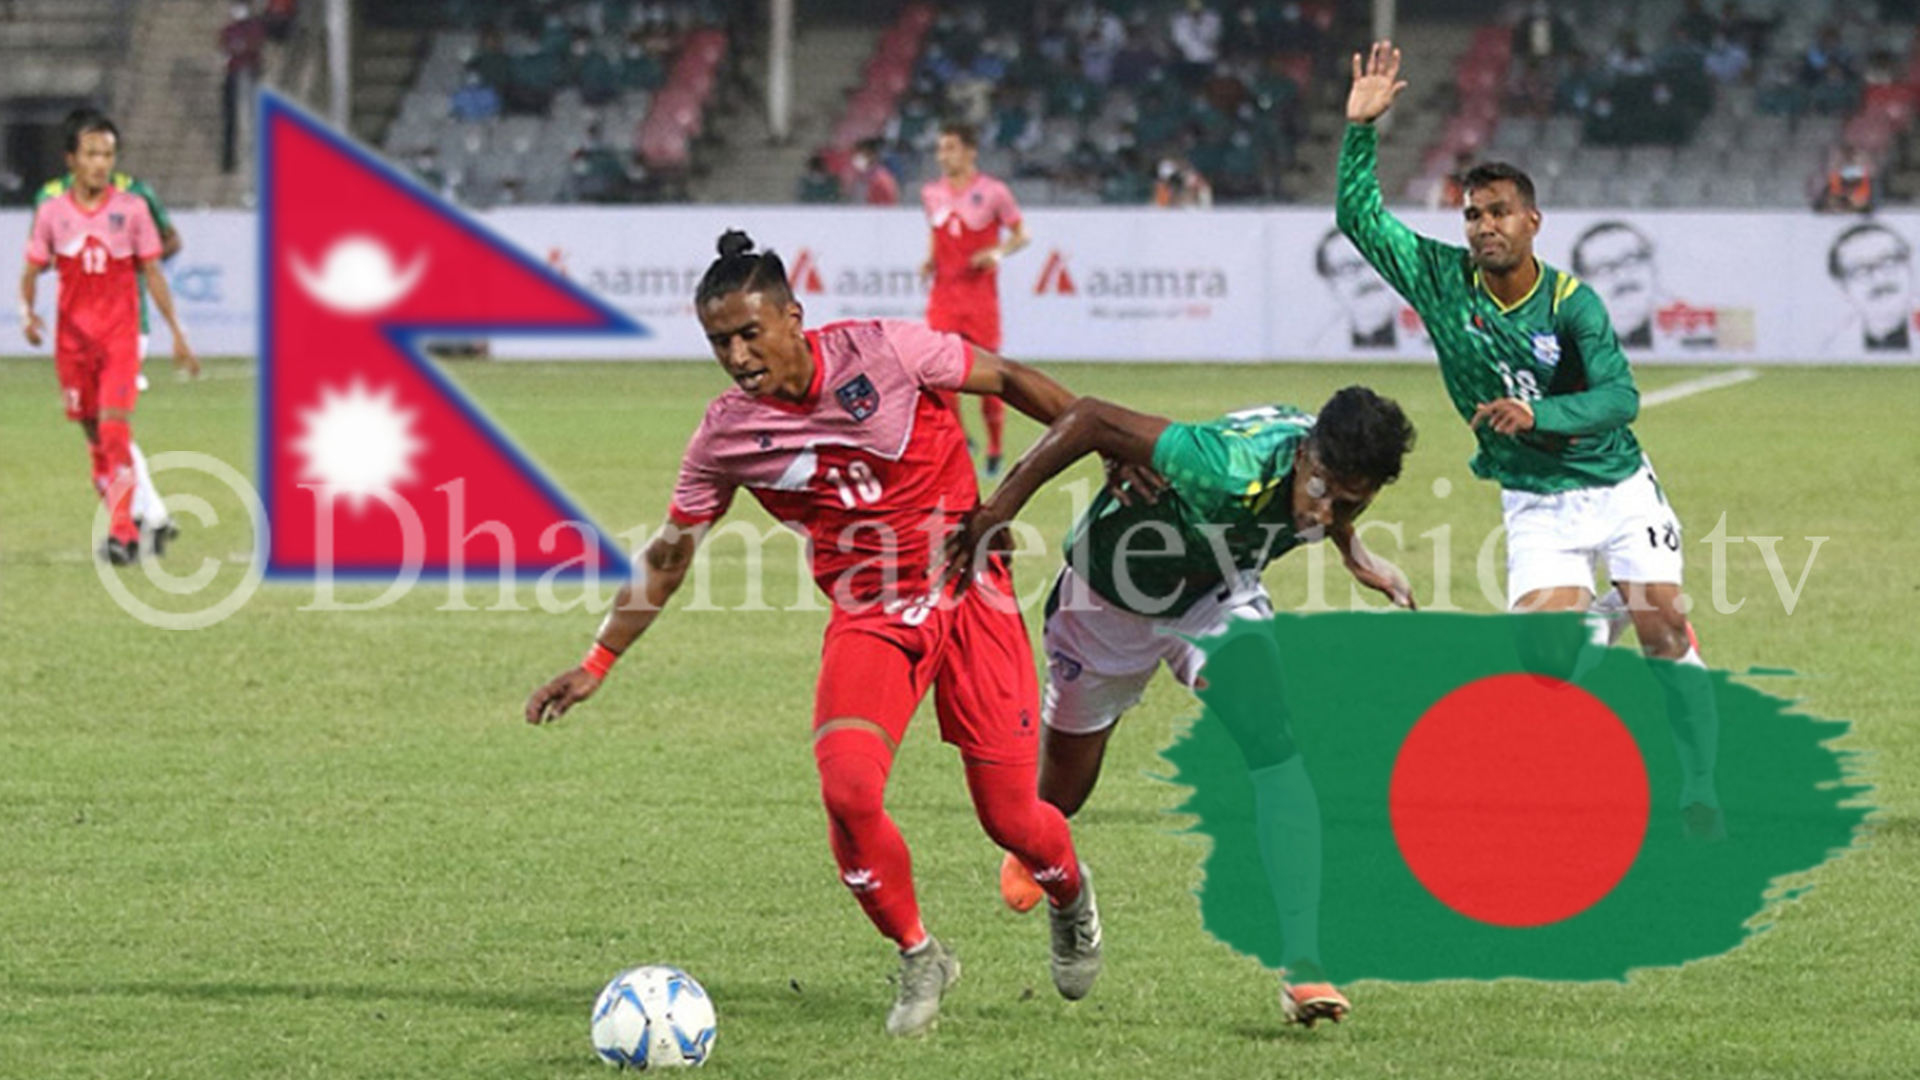 Second international friendly match between Nepal and Bangladesh today